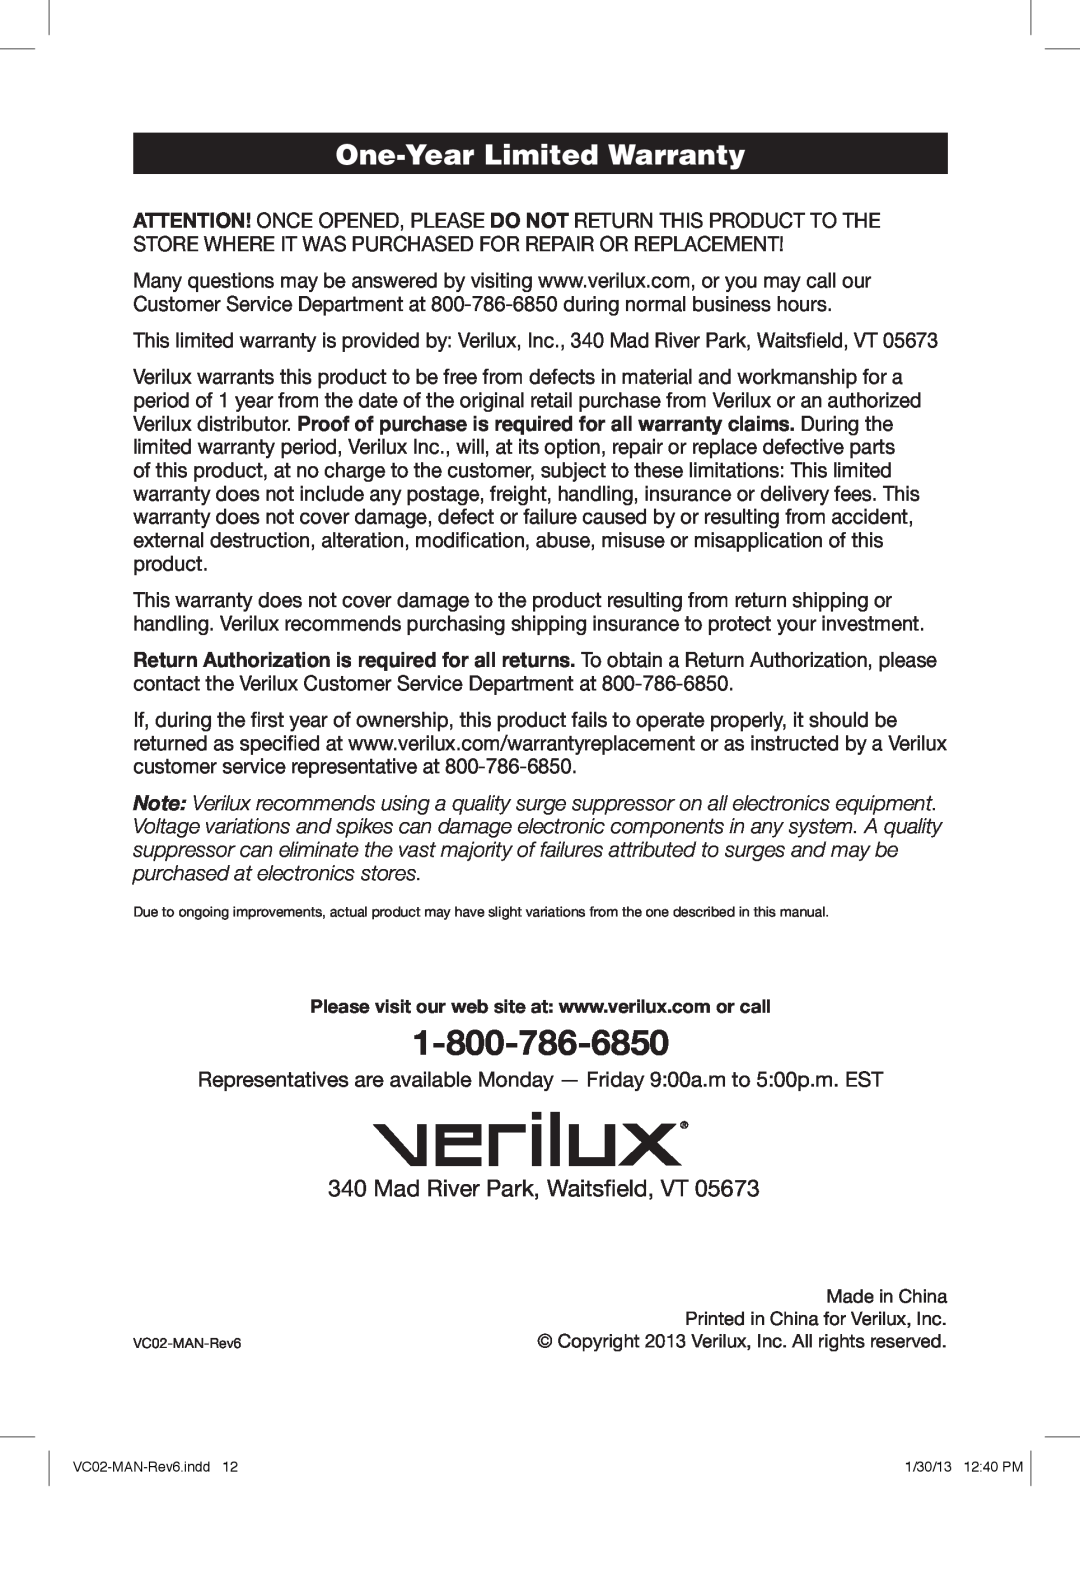 Verilux VC02 manual One-YearLimited Warranty, Mad River Park, Waitsfield, VT 